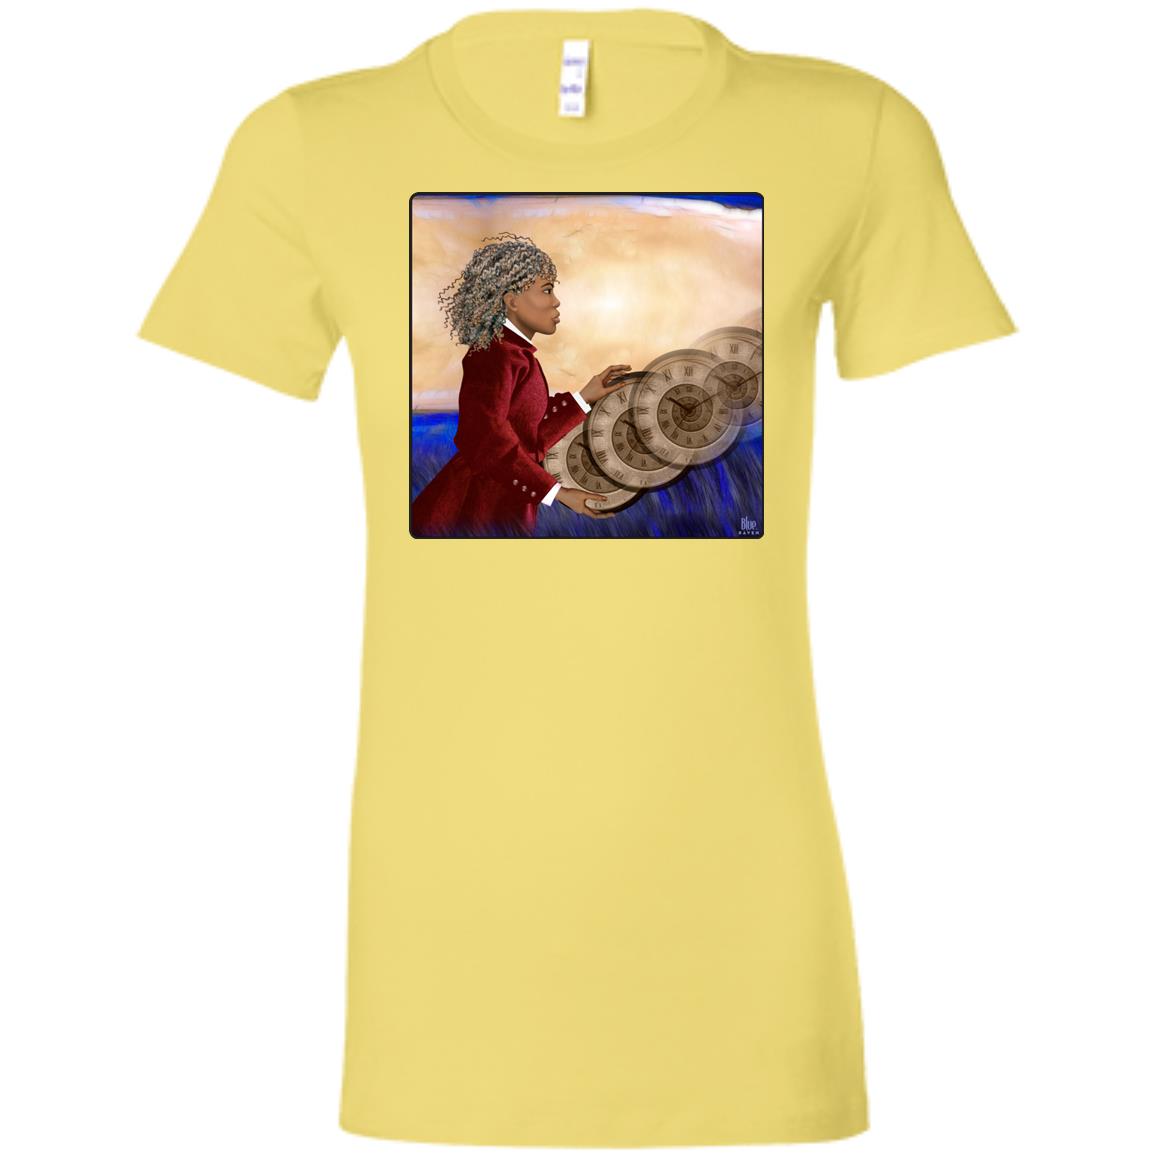 RUSHING TIME - Women's Fitted T-Shirt